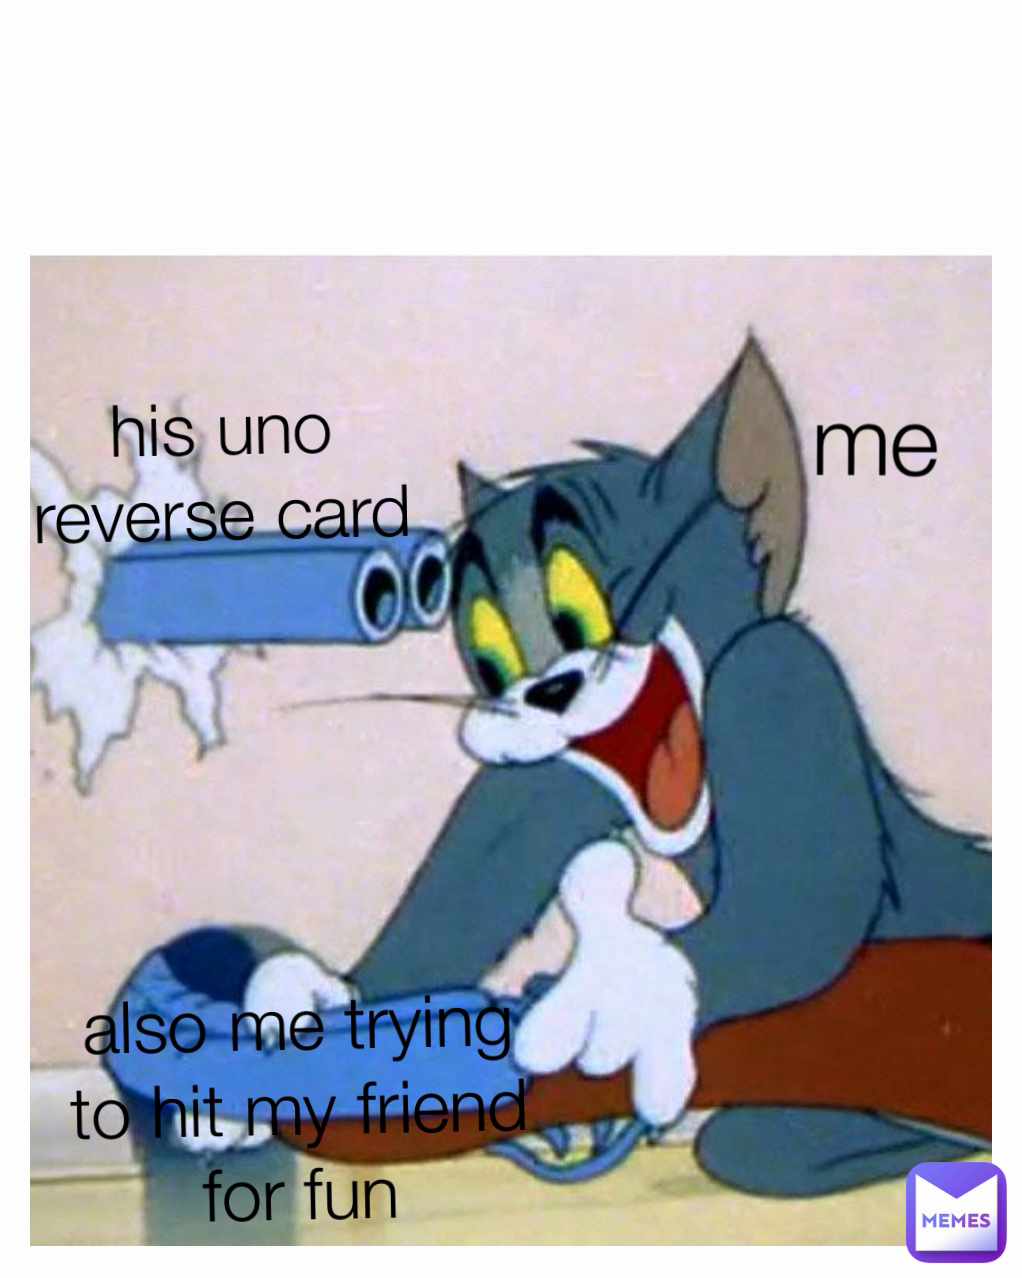 me also me trying
to hit my friend
for fun his uno
reverse card